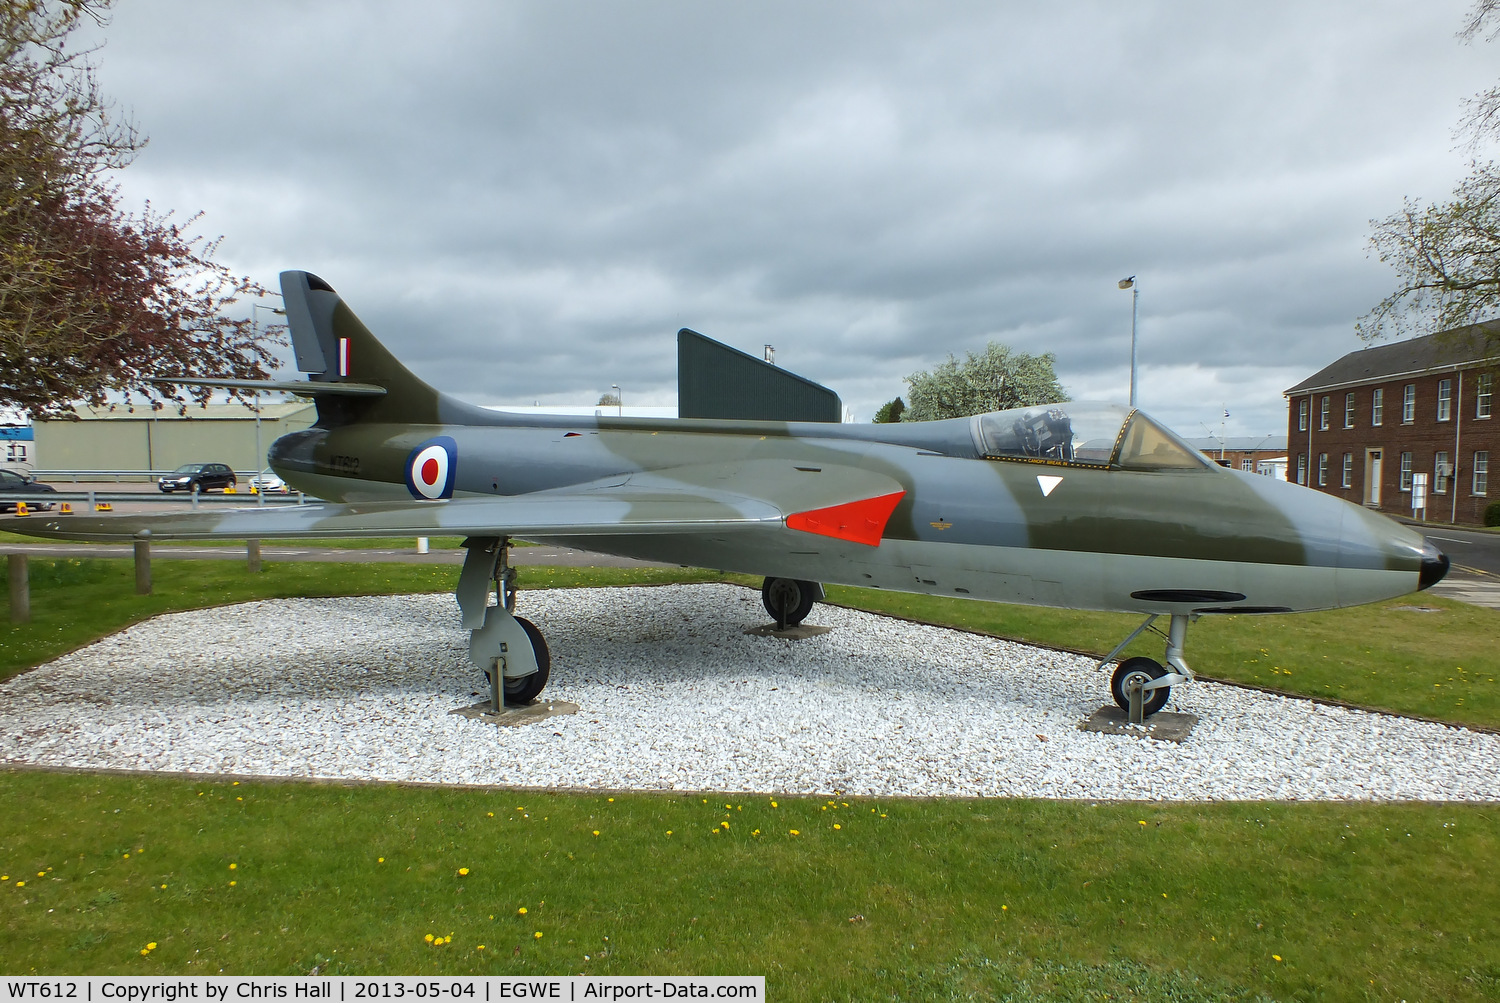 WT612, 1954 Hawker Hunter F.1 C/N 41H/665447, RAF Henlow gate guard, One of the original development aircraft it first flew in July 1954. From 1957 until 1984 it was used as a ground instructional airframe before moving to RAF Henlow. Restored at RAF Wittering in 2004 and moved back to Henlow